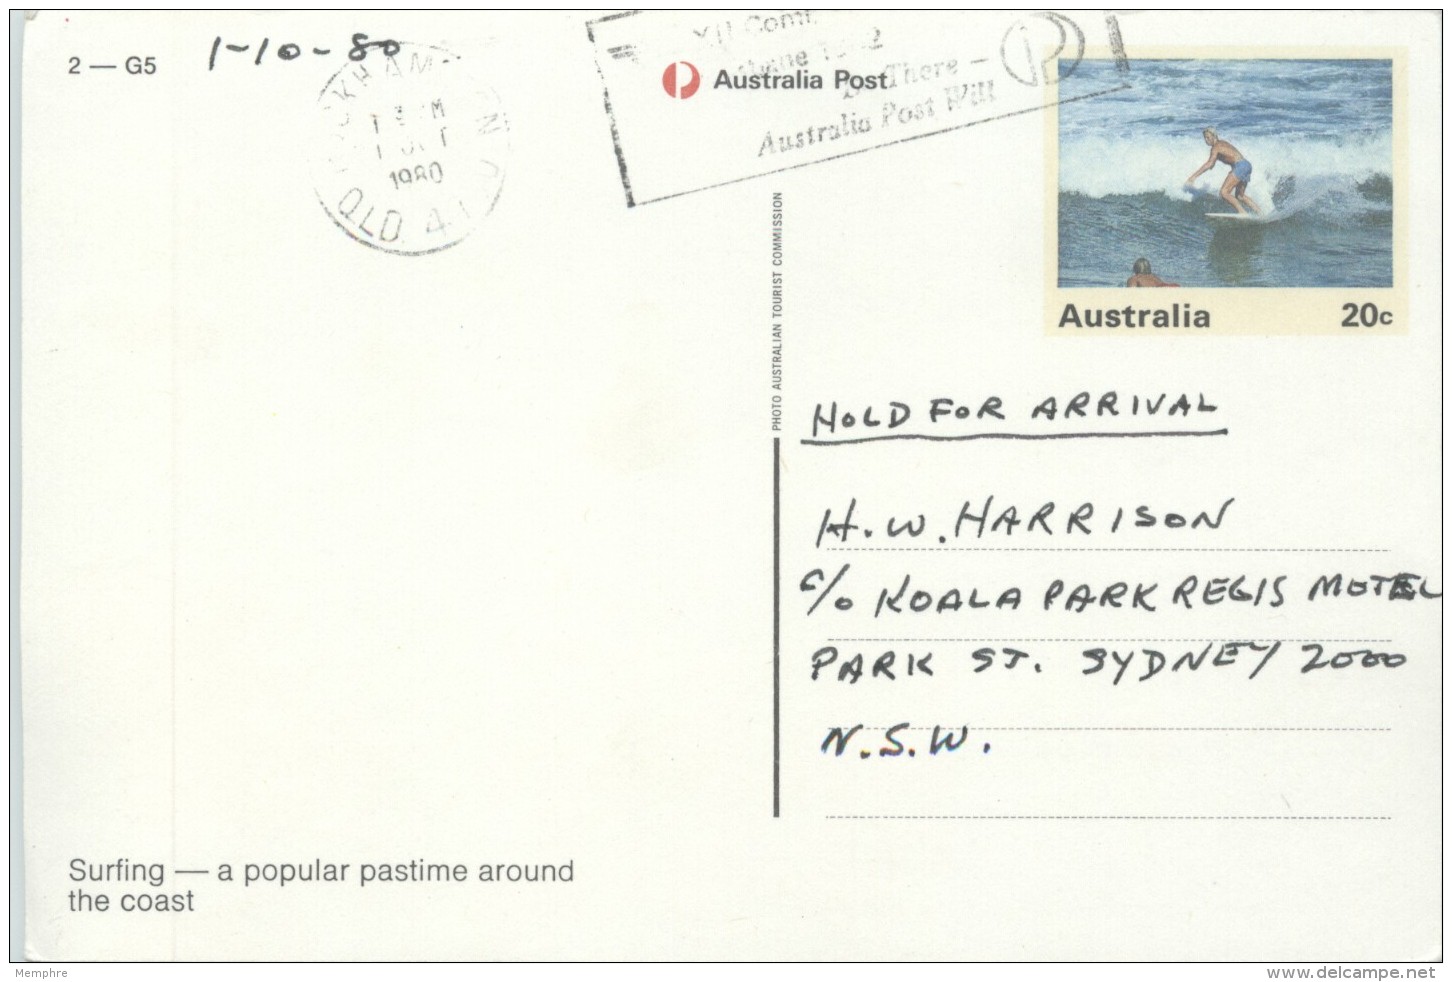 1980  View Card  Surfing - #2-G5  - Used - Postal Stationery